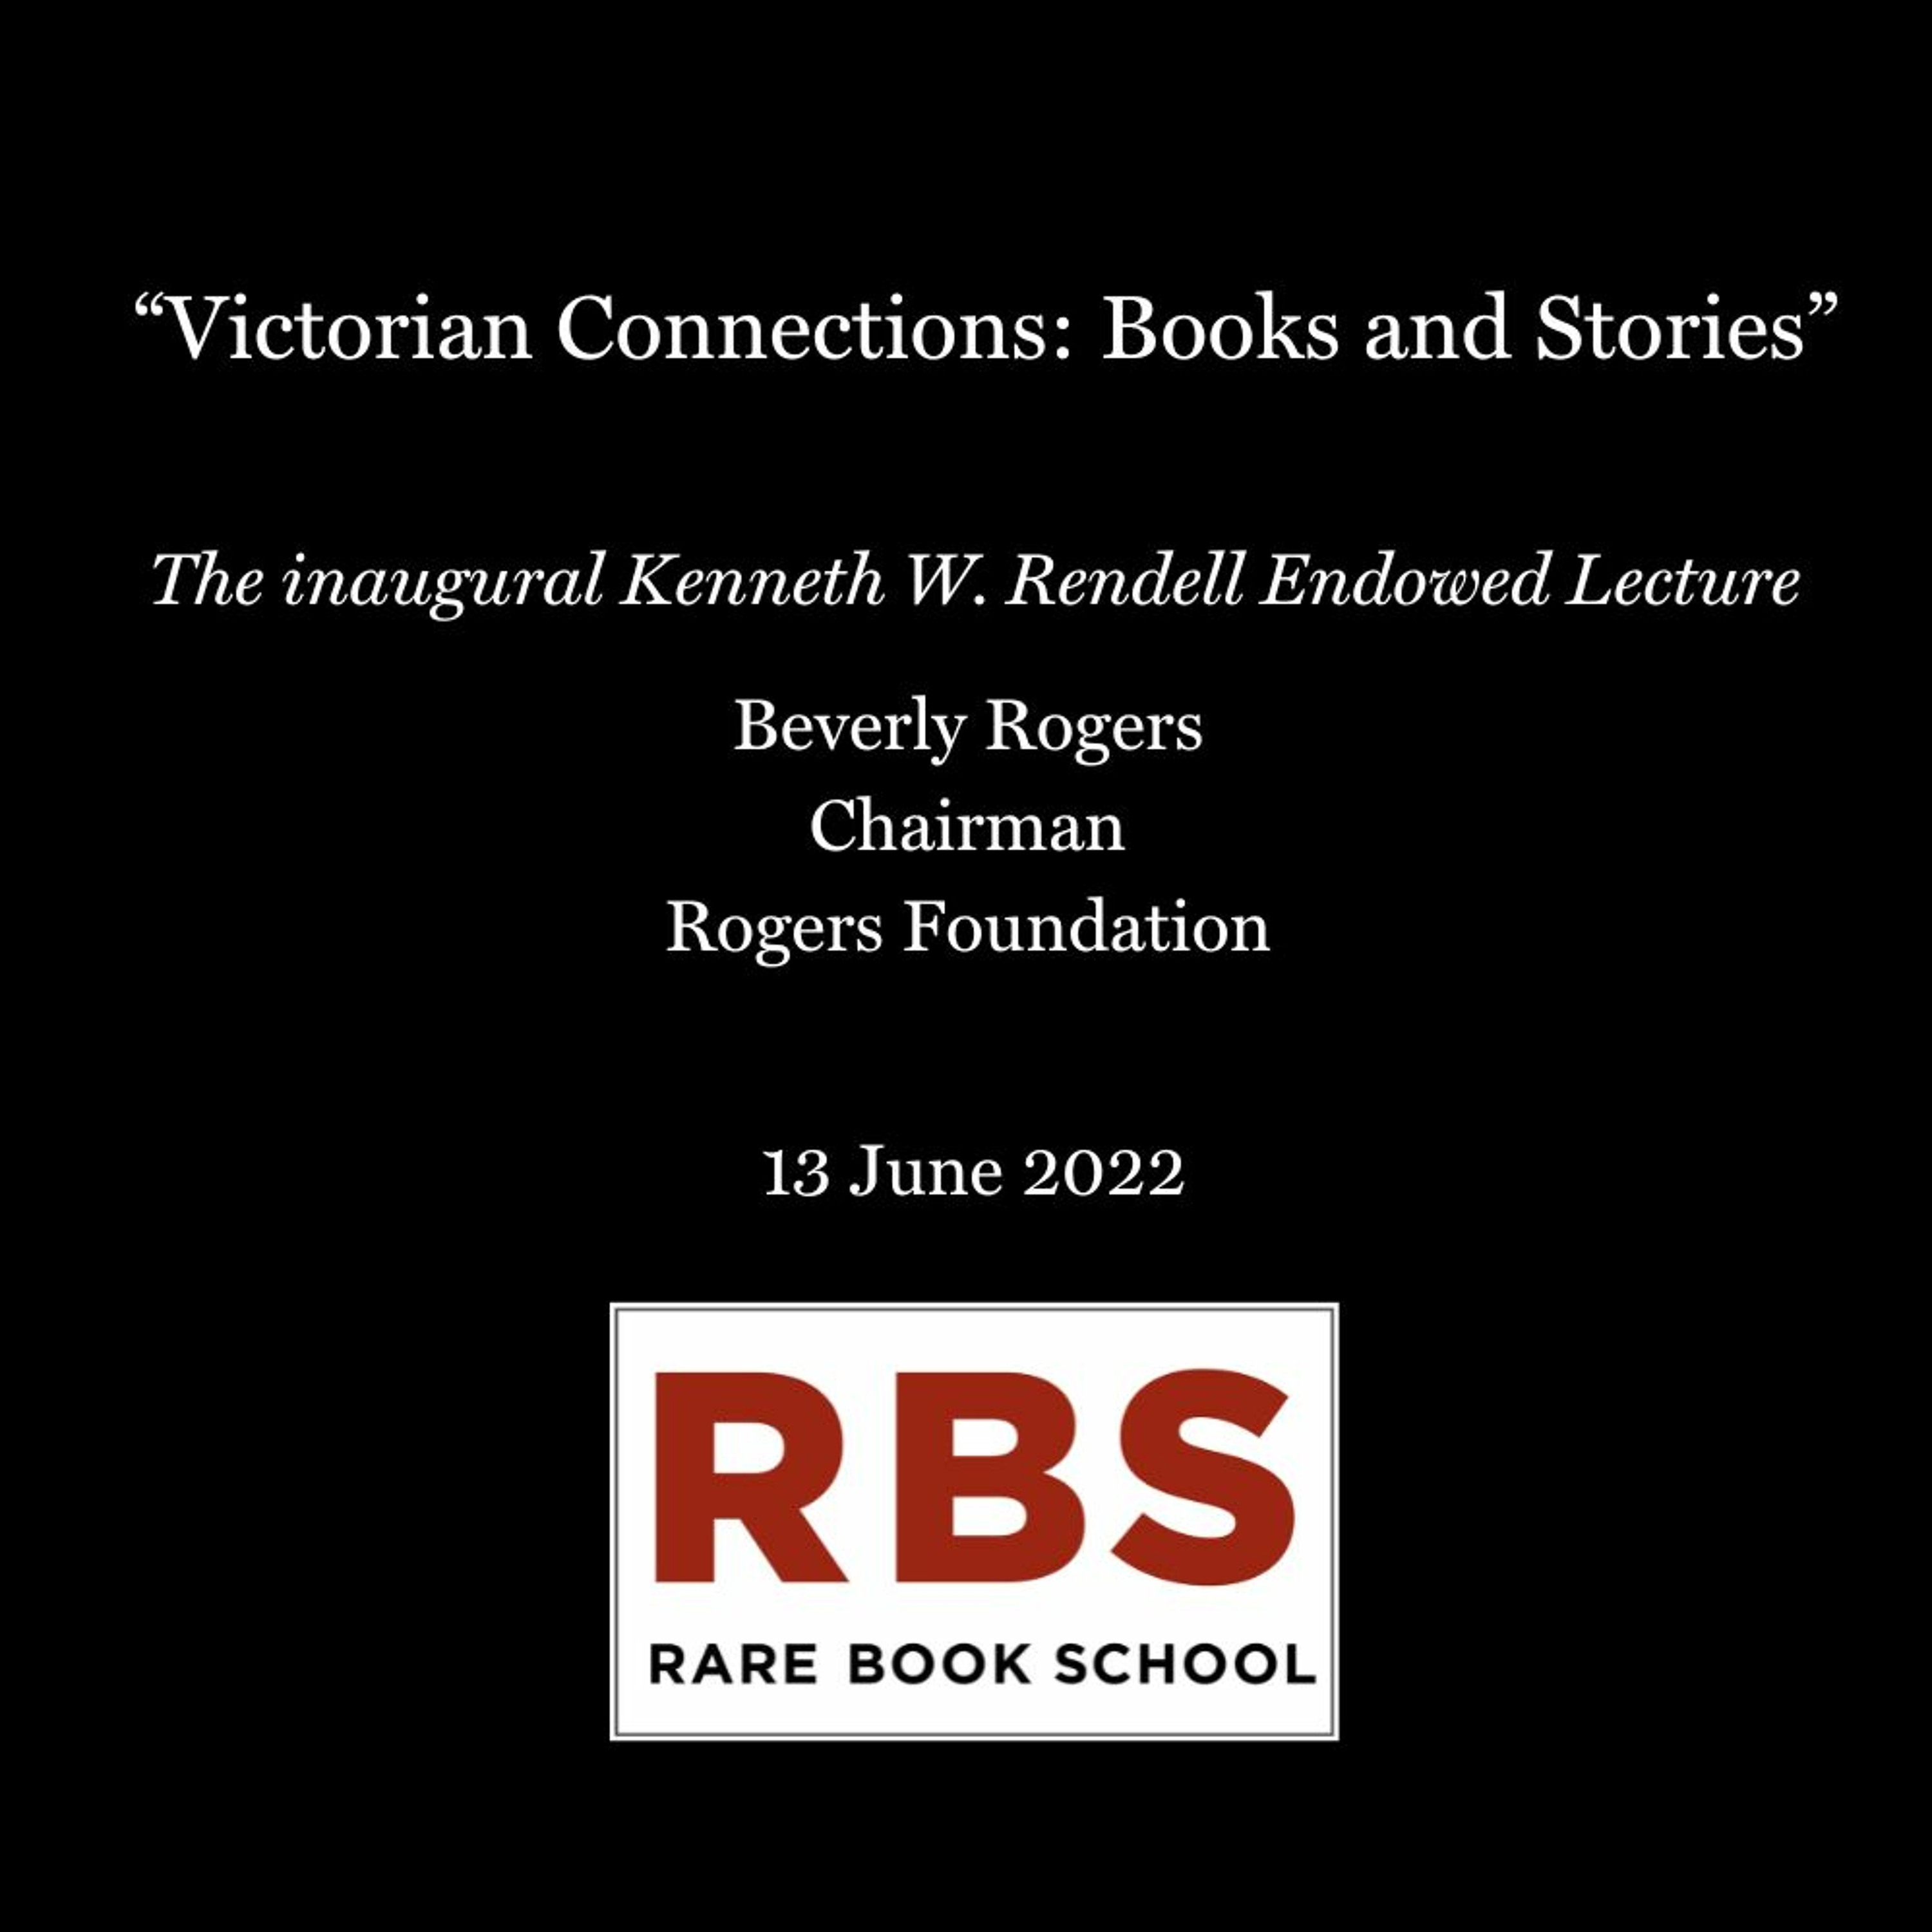 Rogers, Beverly - ”Victorian Connections: Books and Stories” Rendell Lecture - 13 June 2022